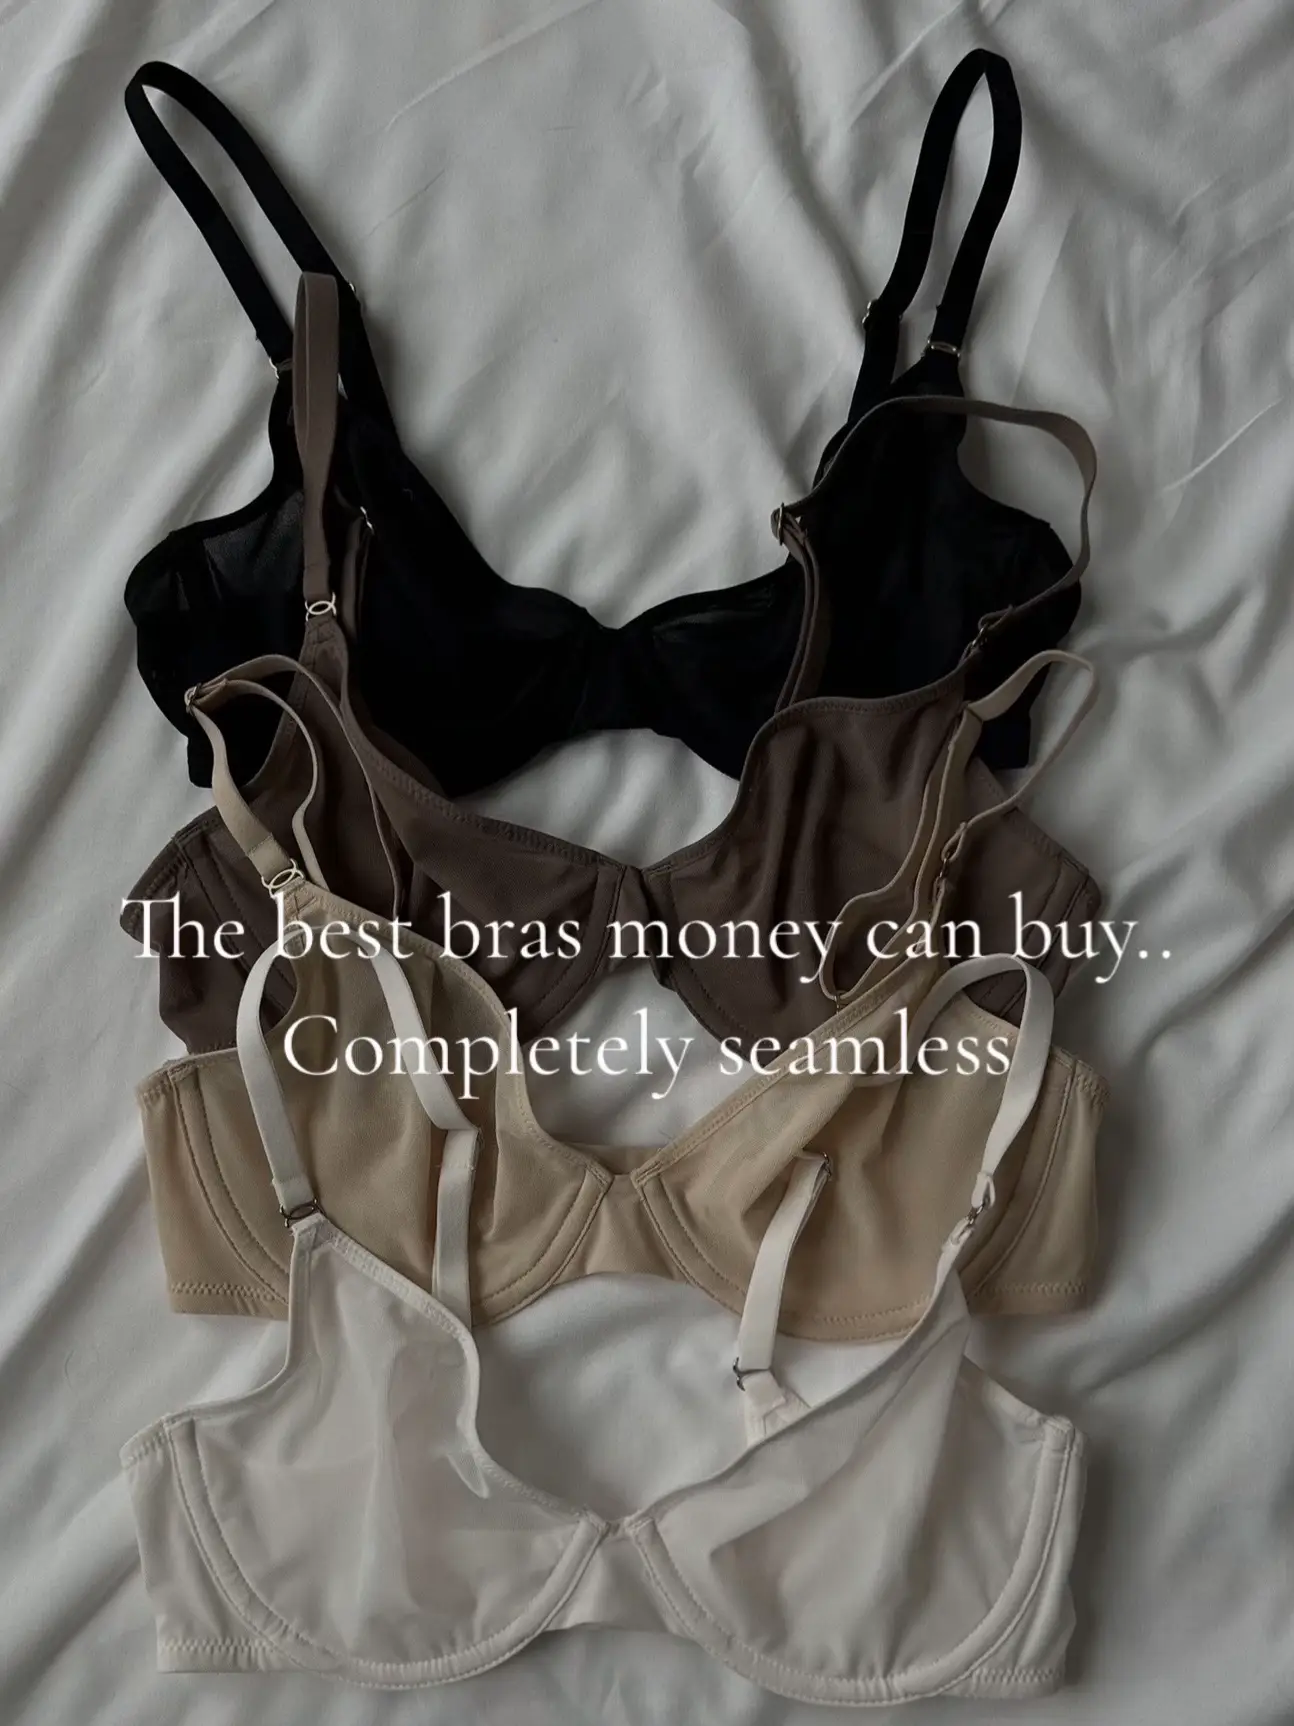 Shop Everyday Bralettes - The Bliss: Fuck Your Laws